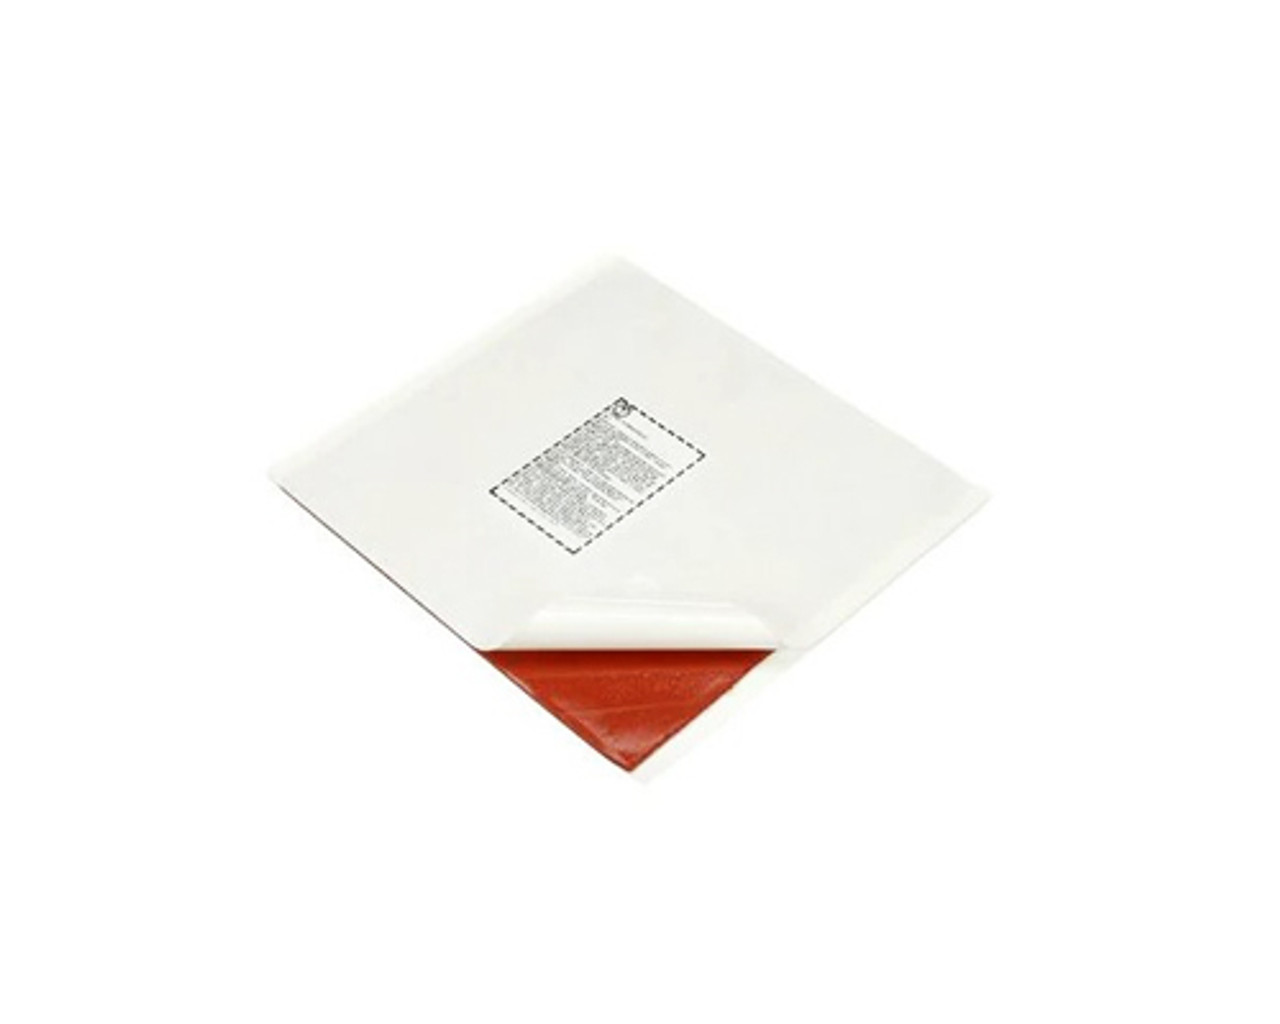 3M Fire Barrier Moldable Putty Pads MPP4-8, Red, 4 in x 8 in